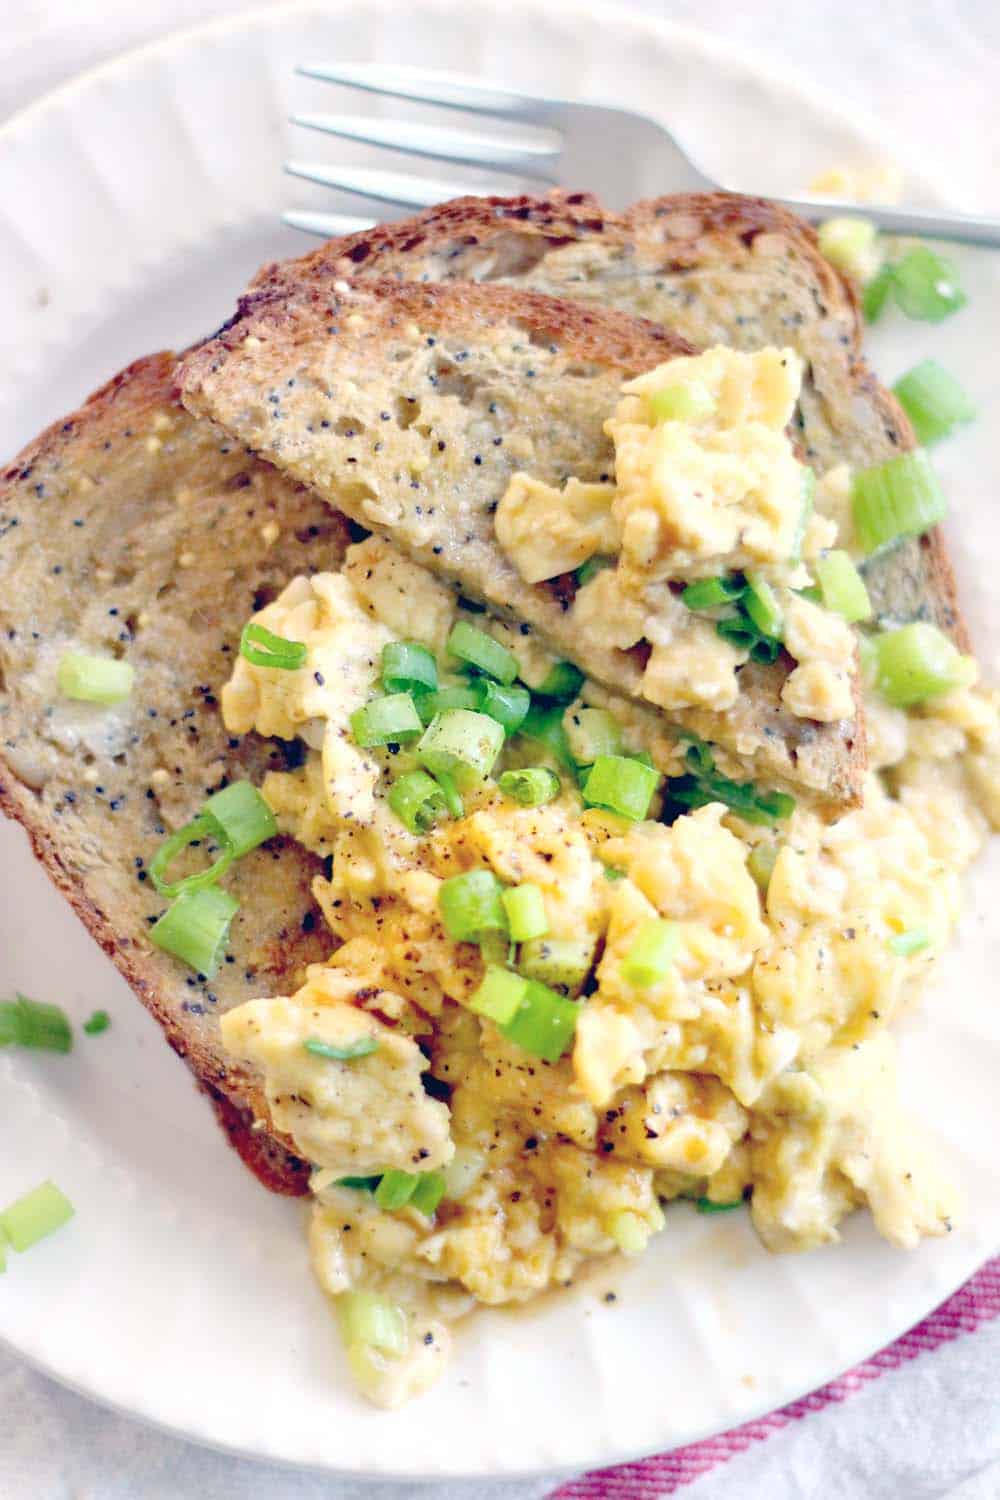 These soy sauce and green onion scrambled eggs are melt-in-your-mouth delicious and take only 5 minutes to make! The perfect low carb, high protein breakfast to get you going for the day.